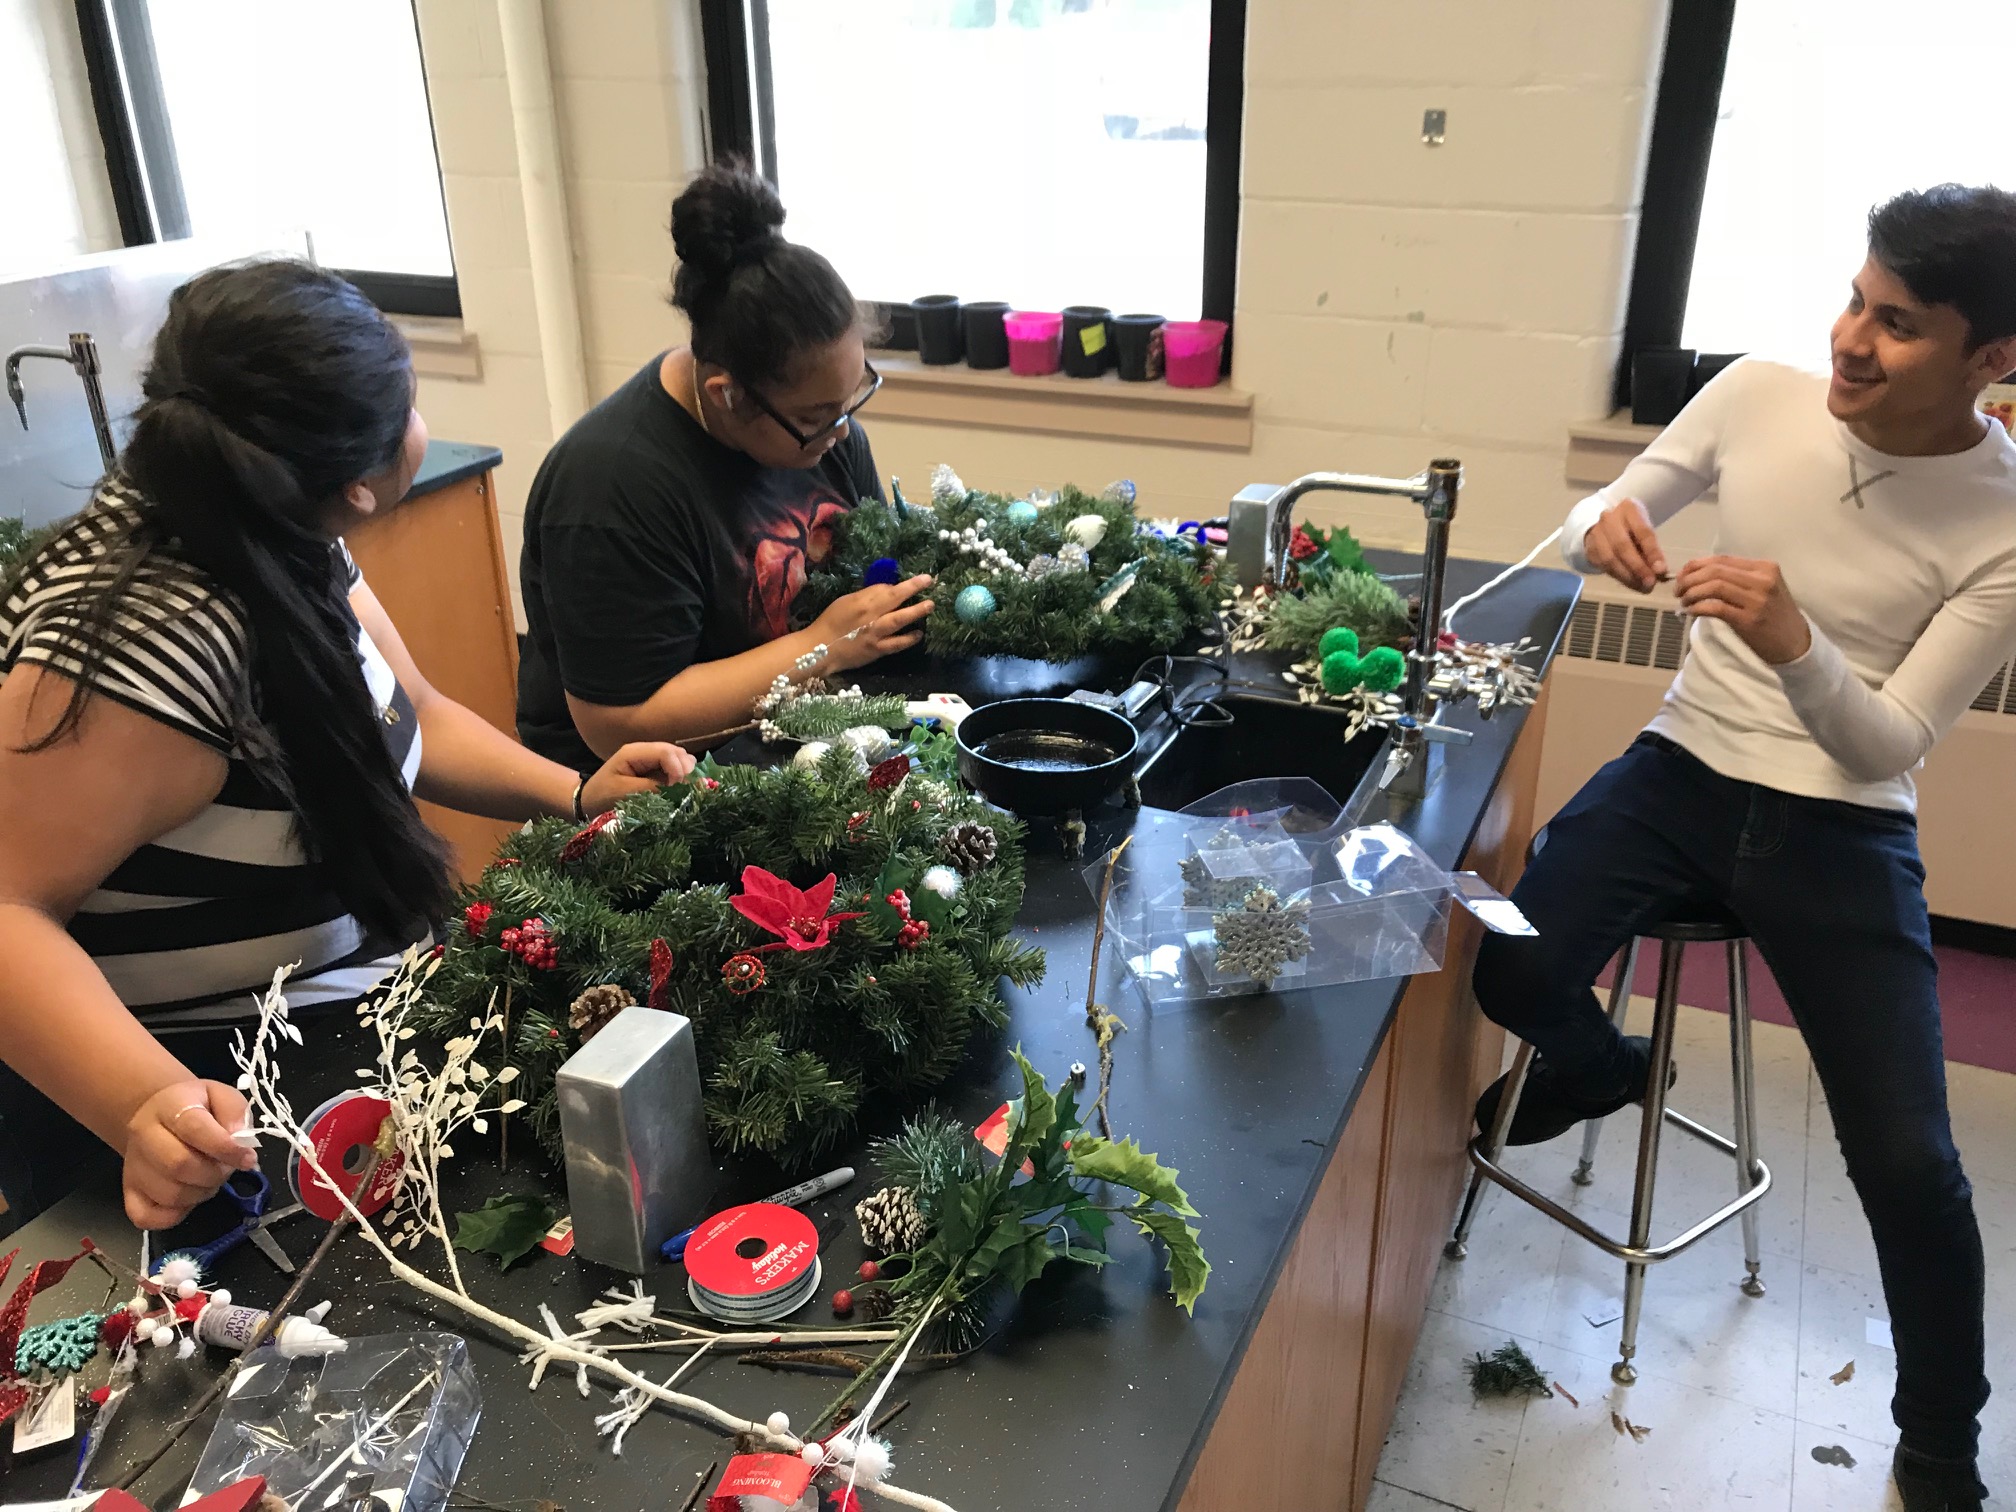 Student entrepreneurs Kimberly Rodriguez Moreno, Angie Vega, and Geronimo Ponce work on wreaths to sell at the market on July 28. (Cole Bradley)